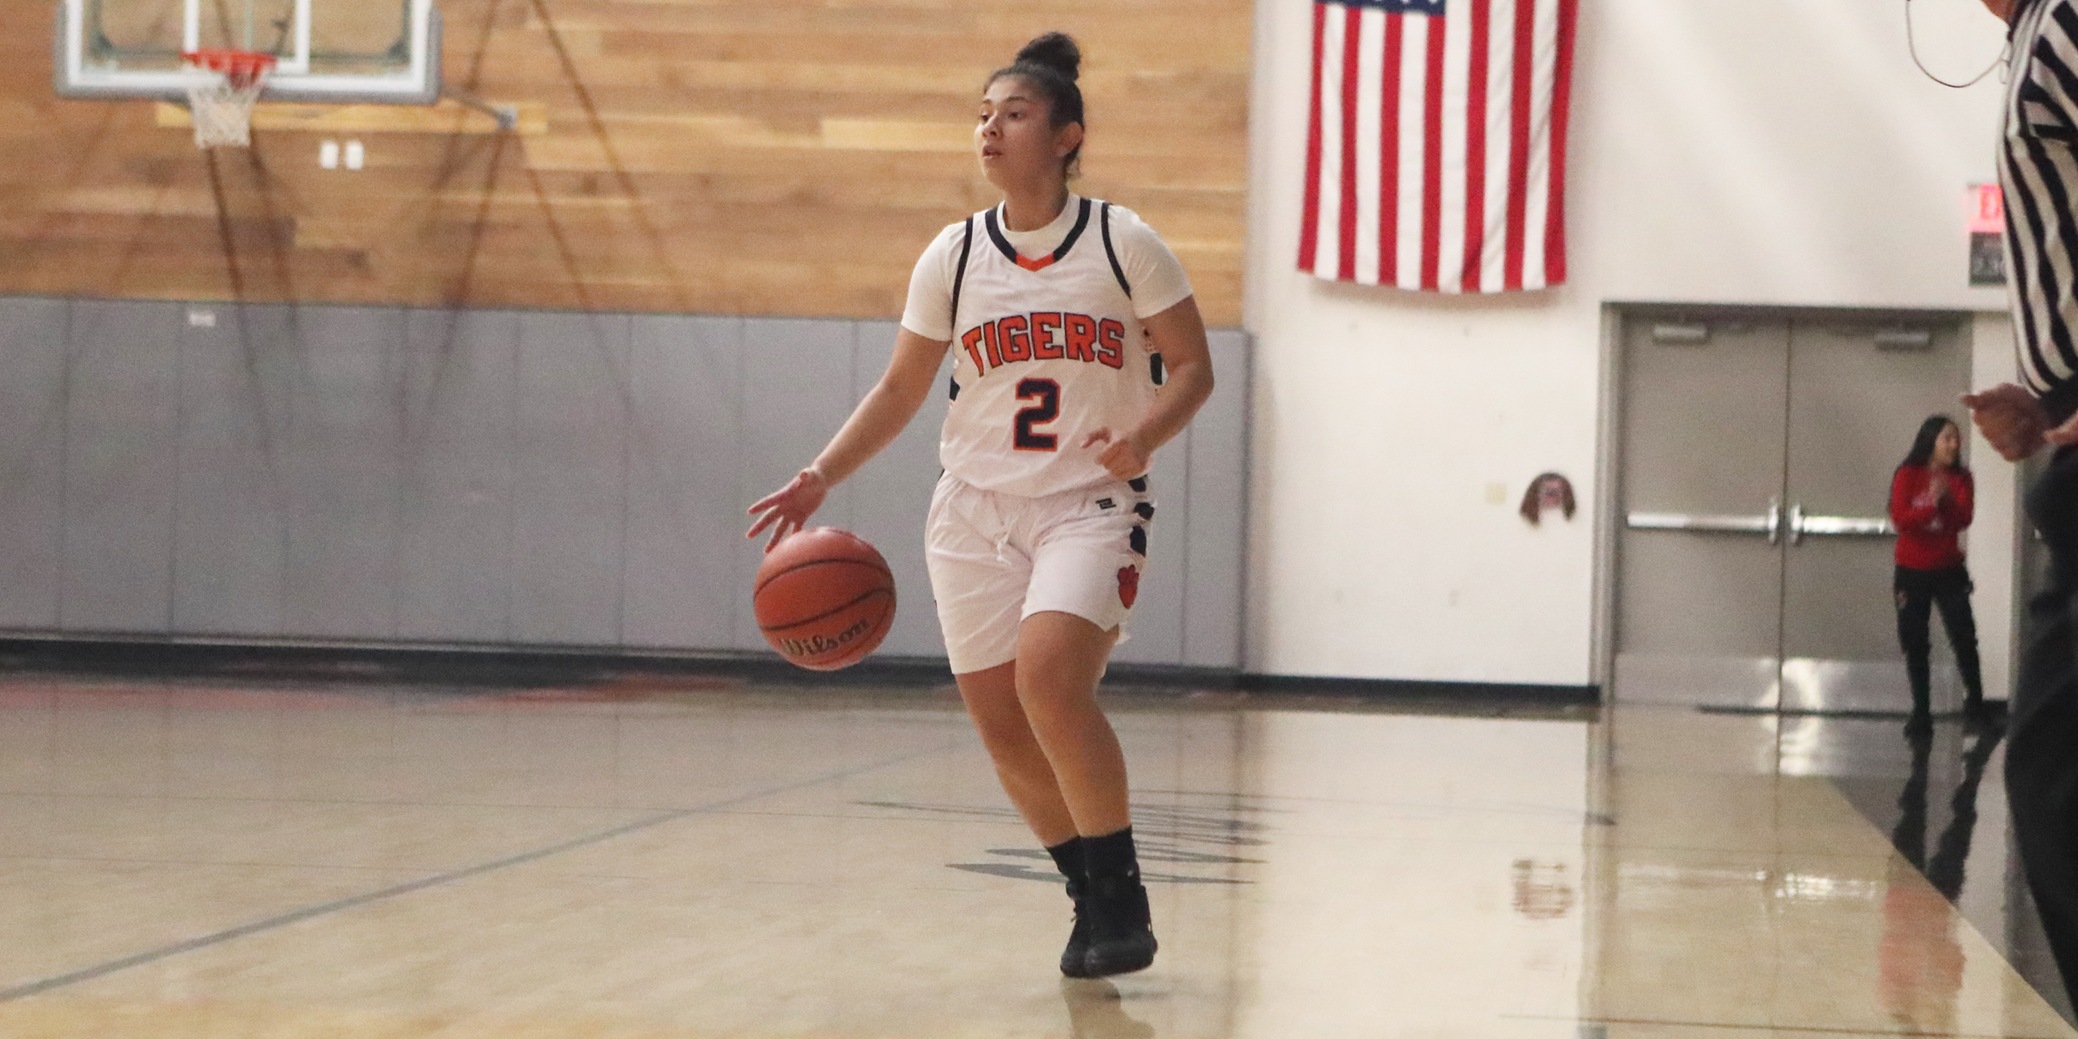 Vanessa Vargas flushed a career-high 16 points in a win over West Hills-Lemoore on Friday afternoon. (Photo by Bobby R. Hester)